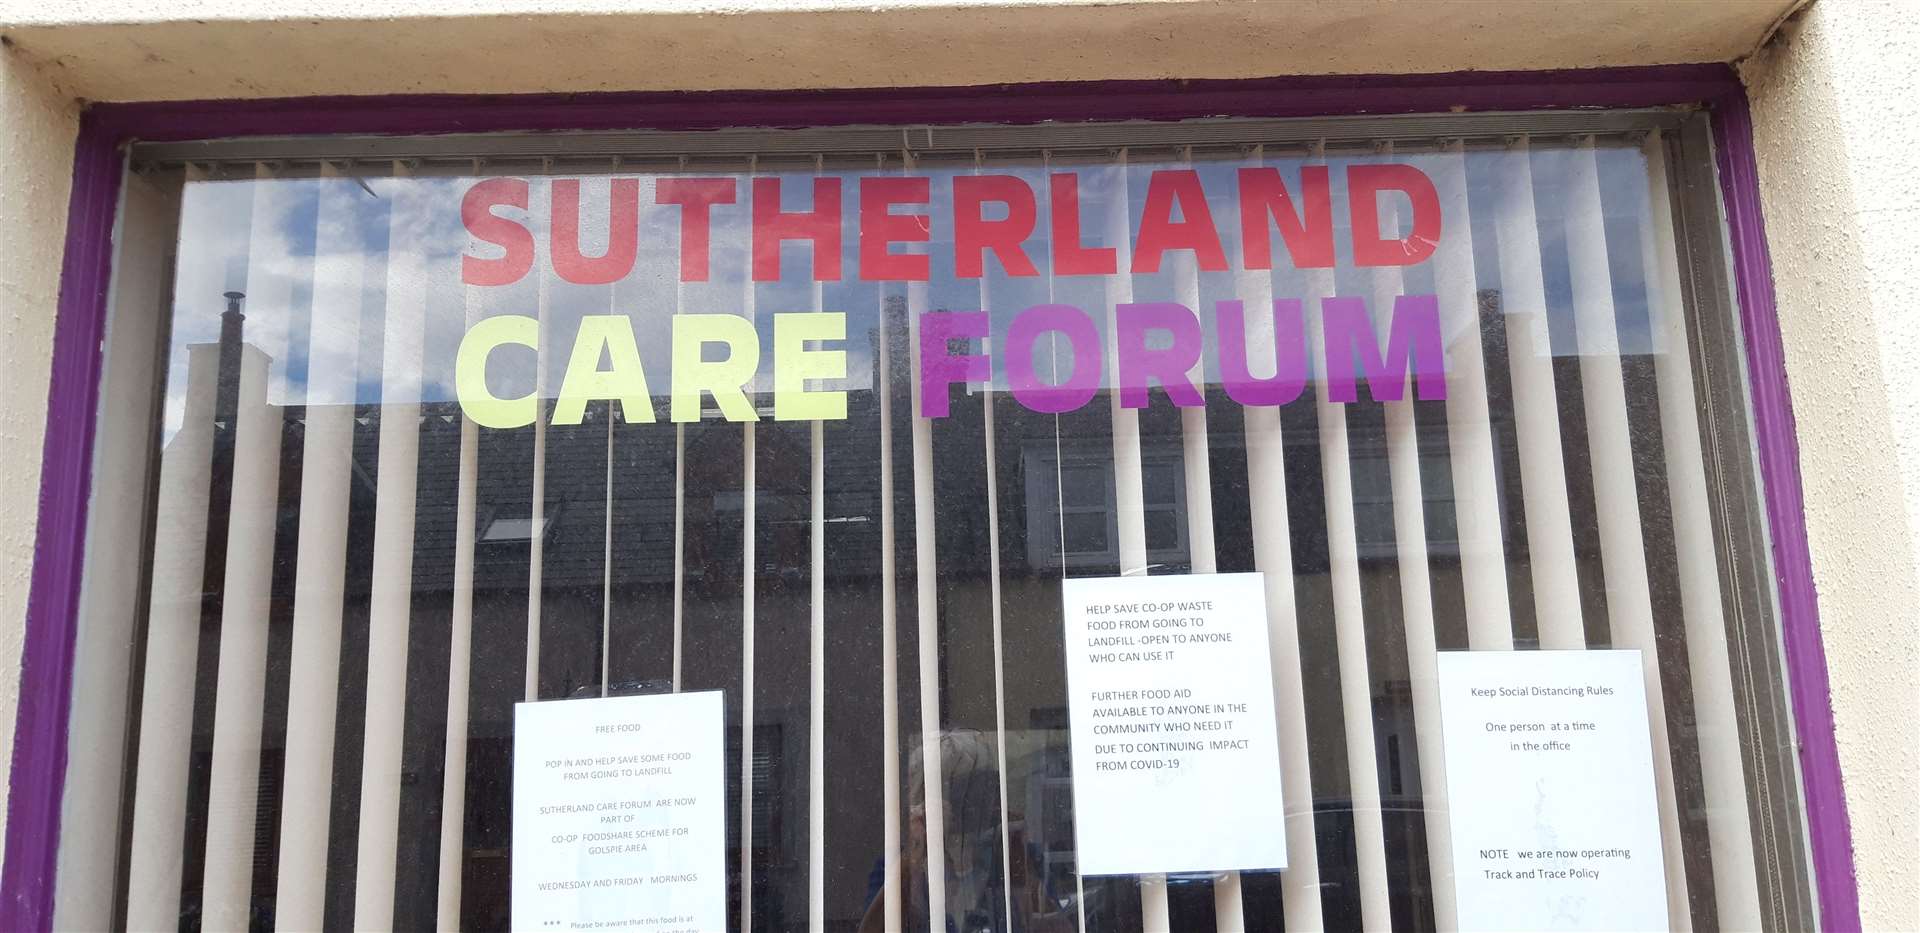 The Sutherland Care Forum office is located on Golspie's Main Street.